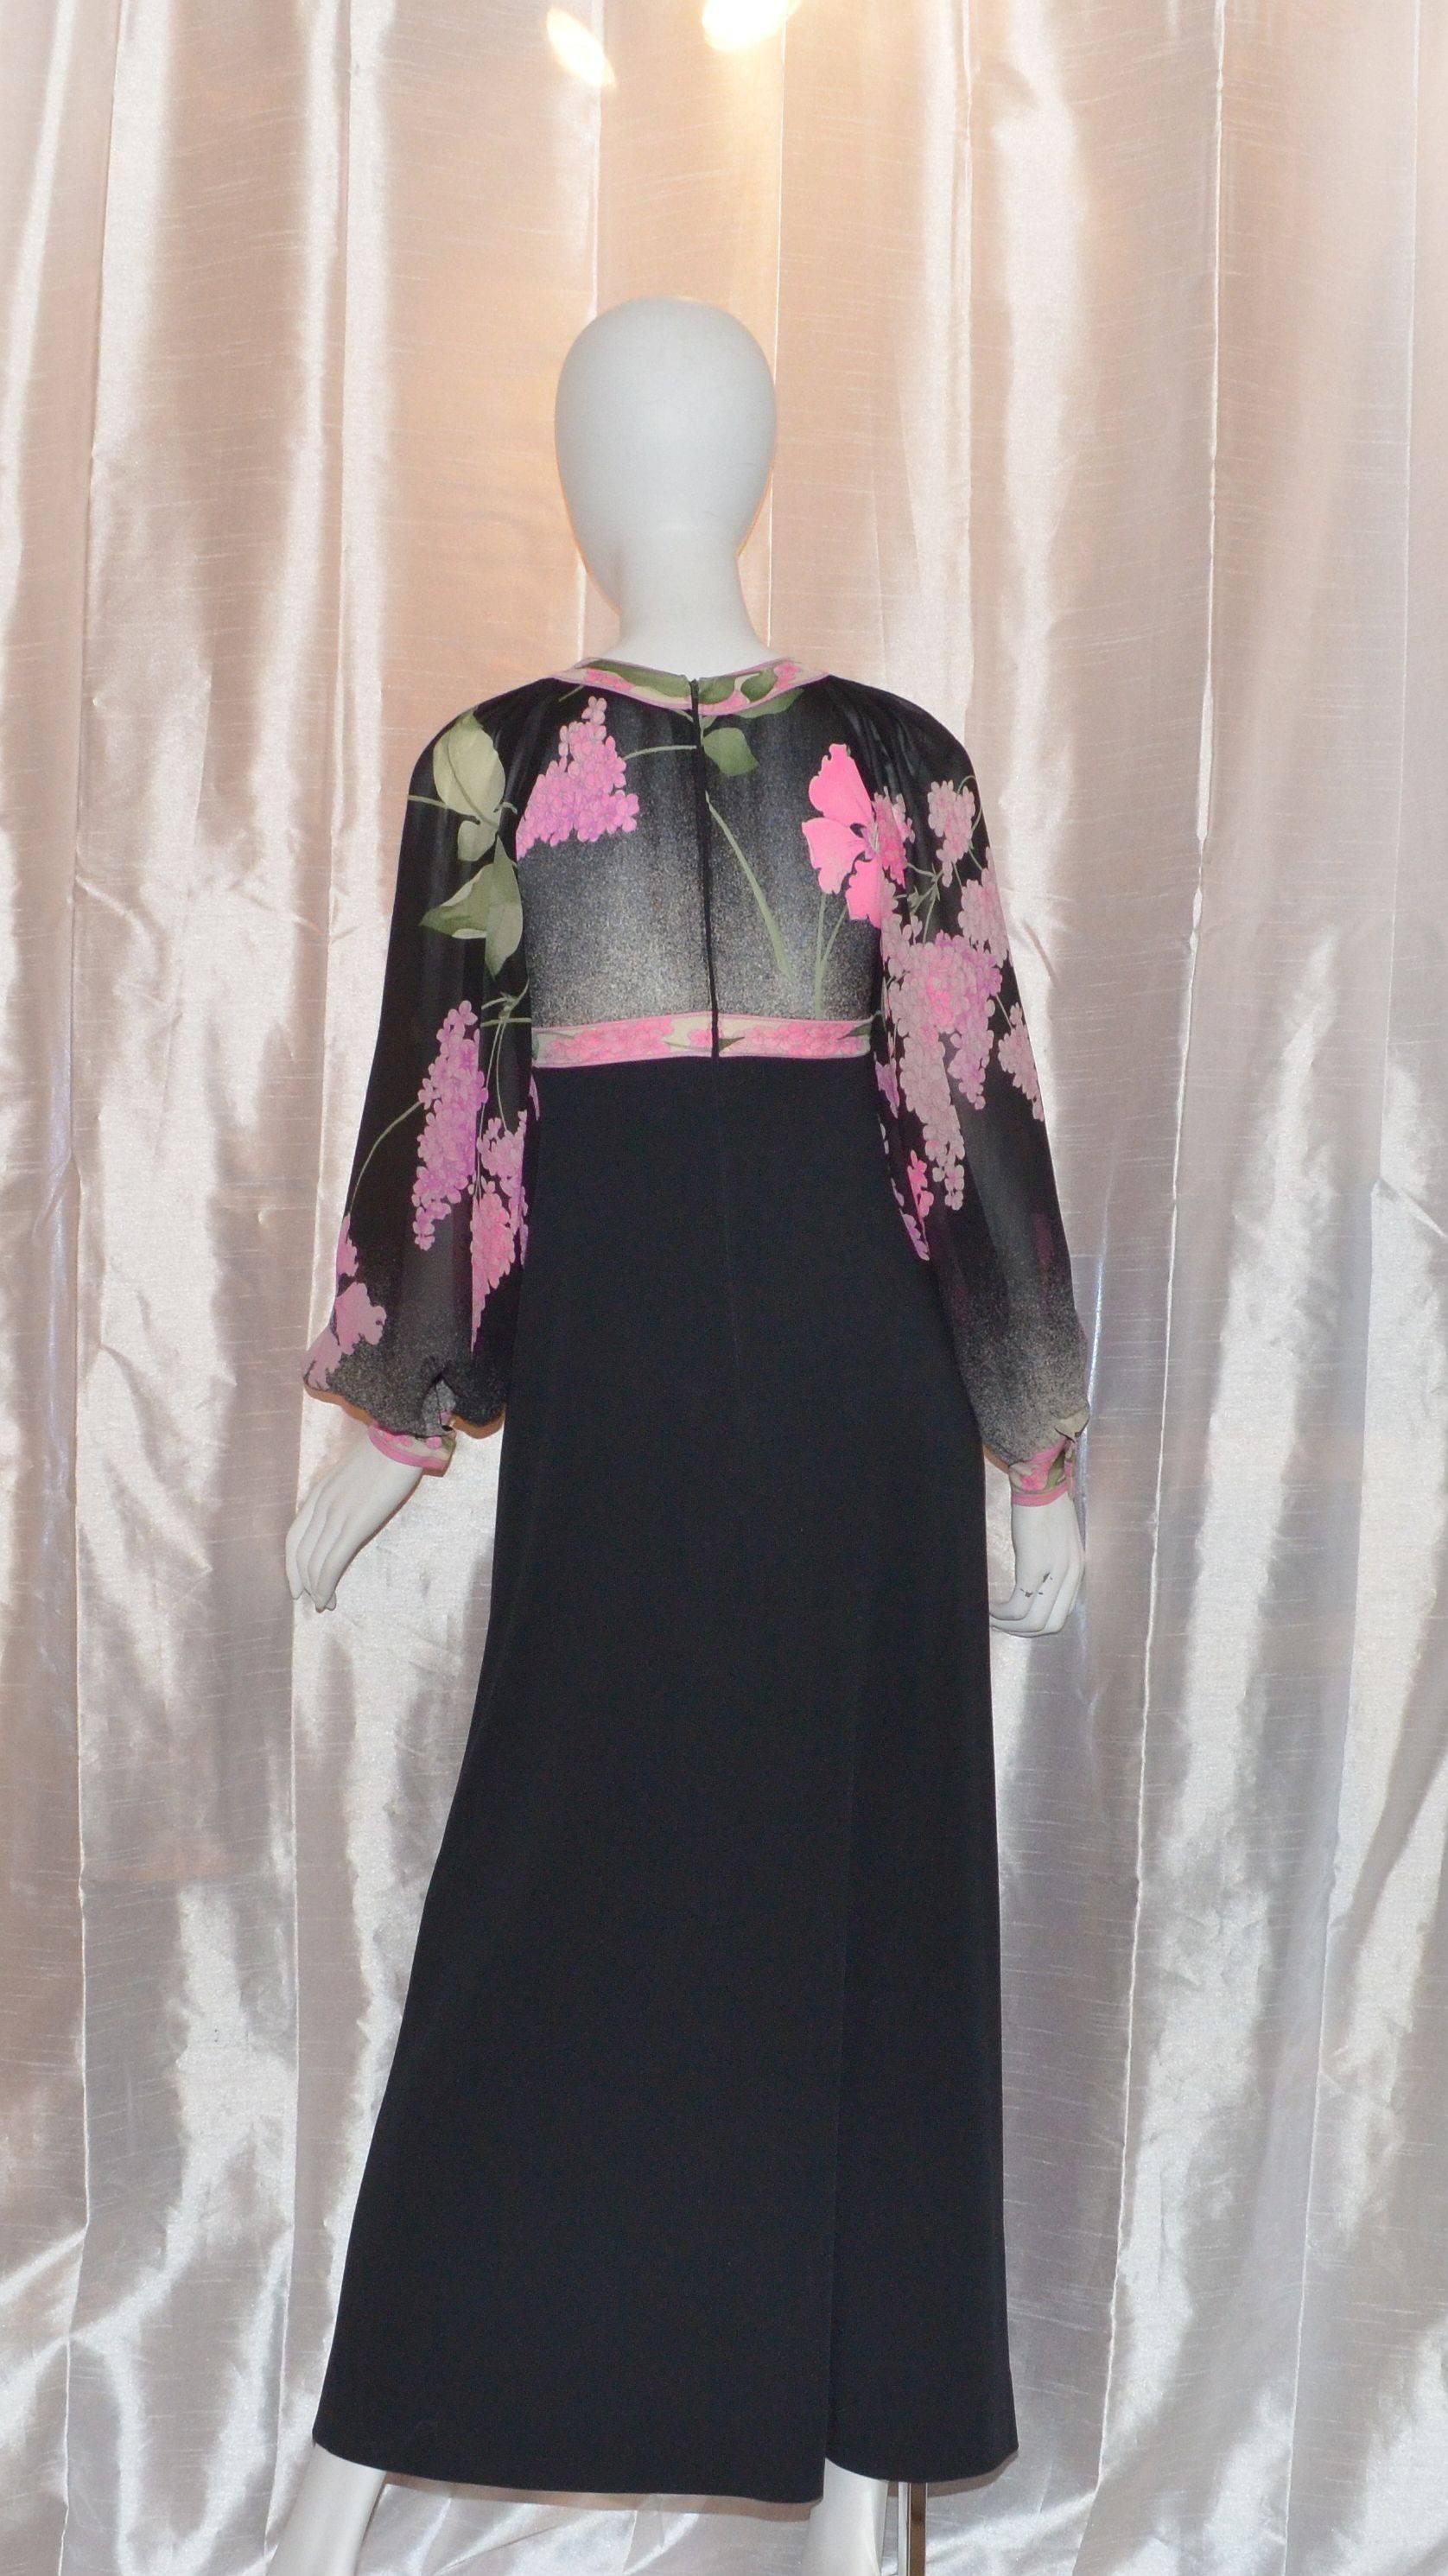 Leonard Paris Floral Chiffon Sleeve Gown

Leonard Paris gown features a cross-heart neckline with a floral print on a jersey bodice and a sheer billow sleeve. Dress has a back zipper closure. Made in France. Measurements are as follows:

Garment